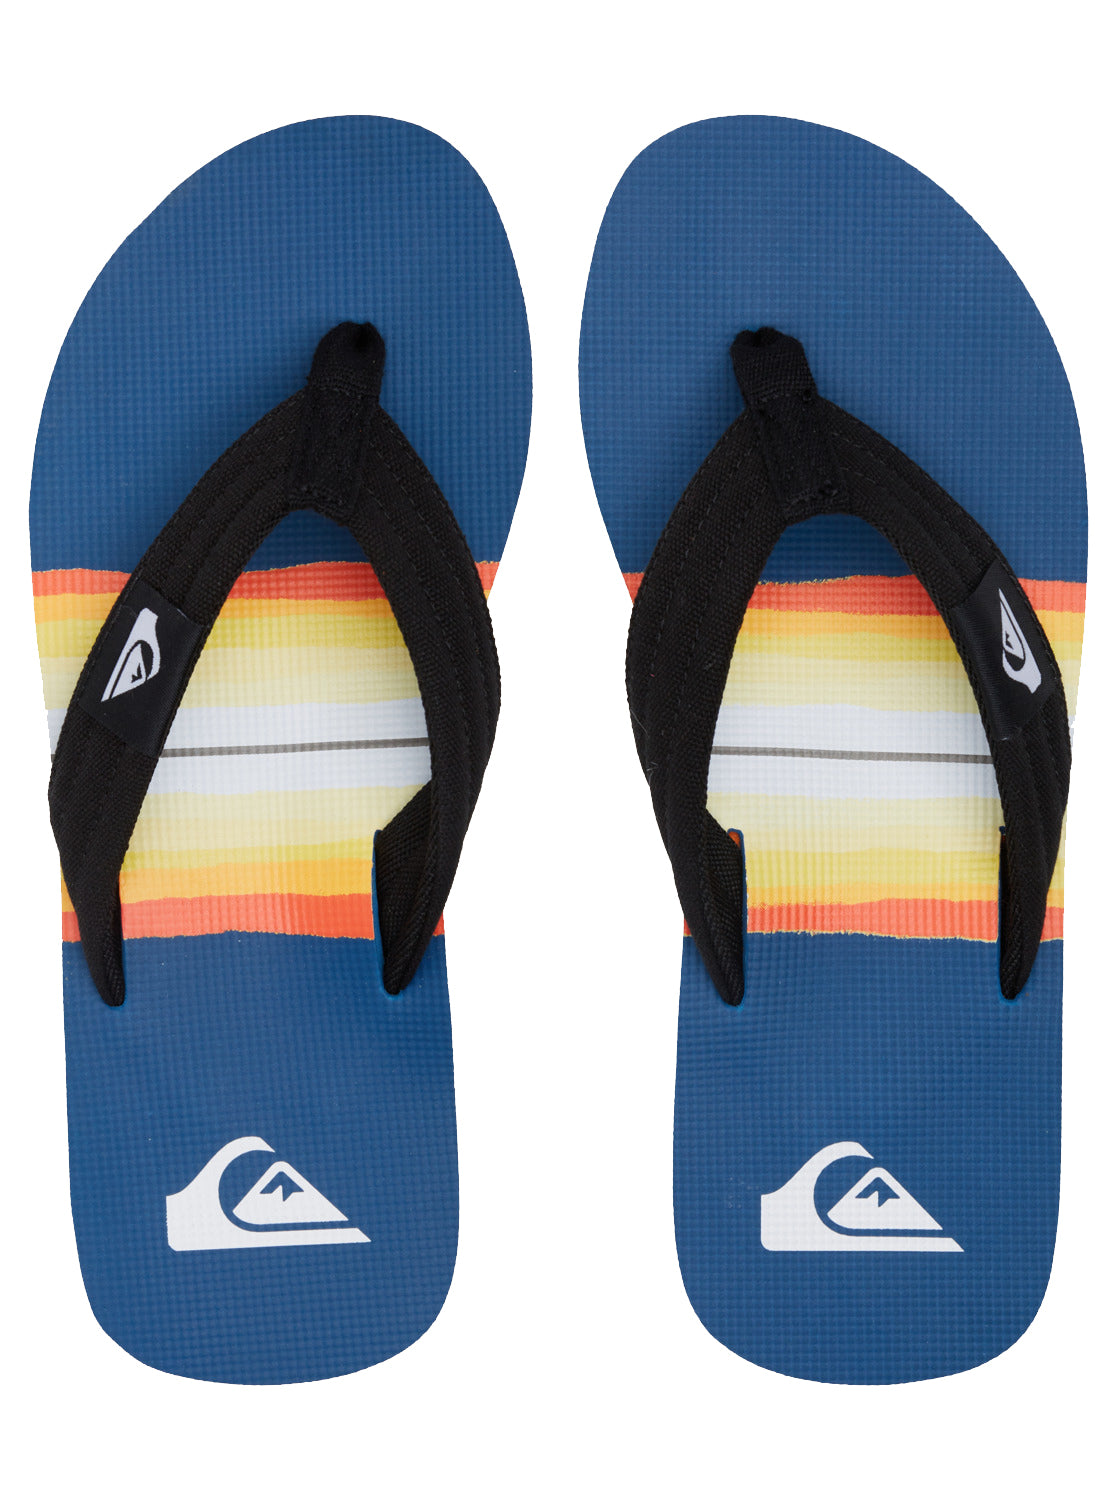 Quiksilver Molokai Layback Youth Sandal BYJ2-Blue 2 12 C